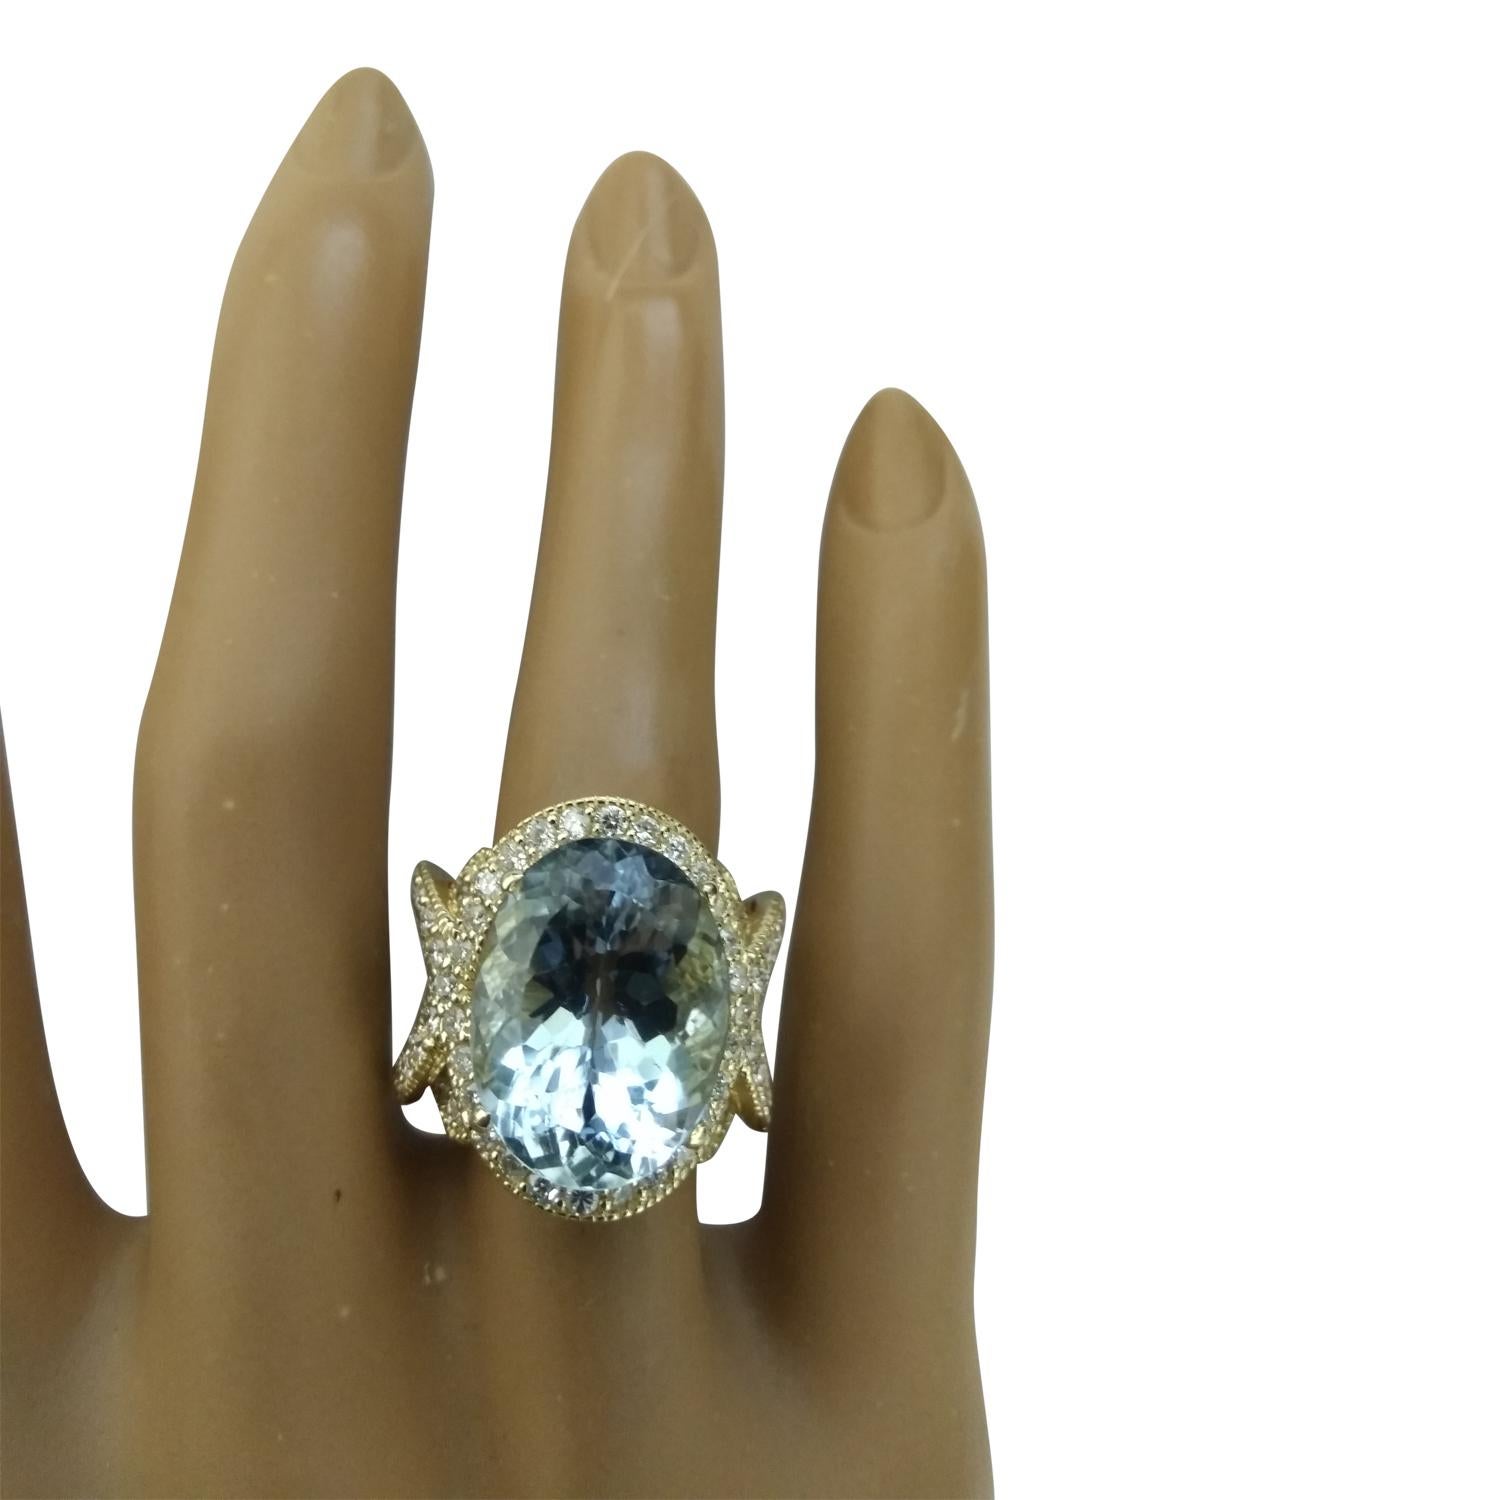 12.21 Carat Natural Aquamarine 14 Karat Solid Yellow Gold Diamond Ring
Stamped: 14K 
Total Ring Weight: 13.4 Grams 
Aquamarine Weight 10.21 Carat (16.00x12.00 Millimeters)
Diamond Weight: 2.00 carat (F-G Color, VS2-SI1 Clarity )
Face Measures: 21.00